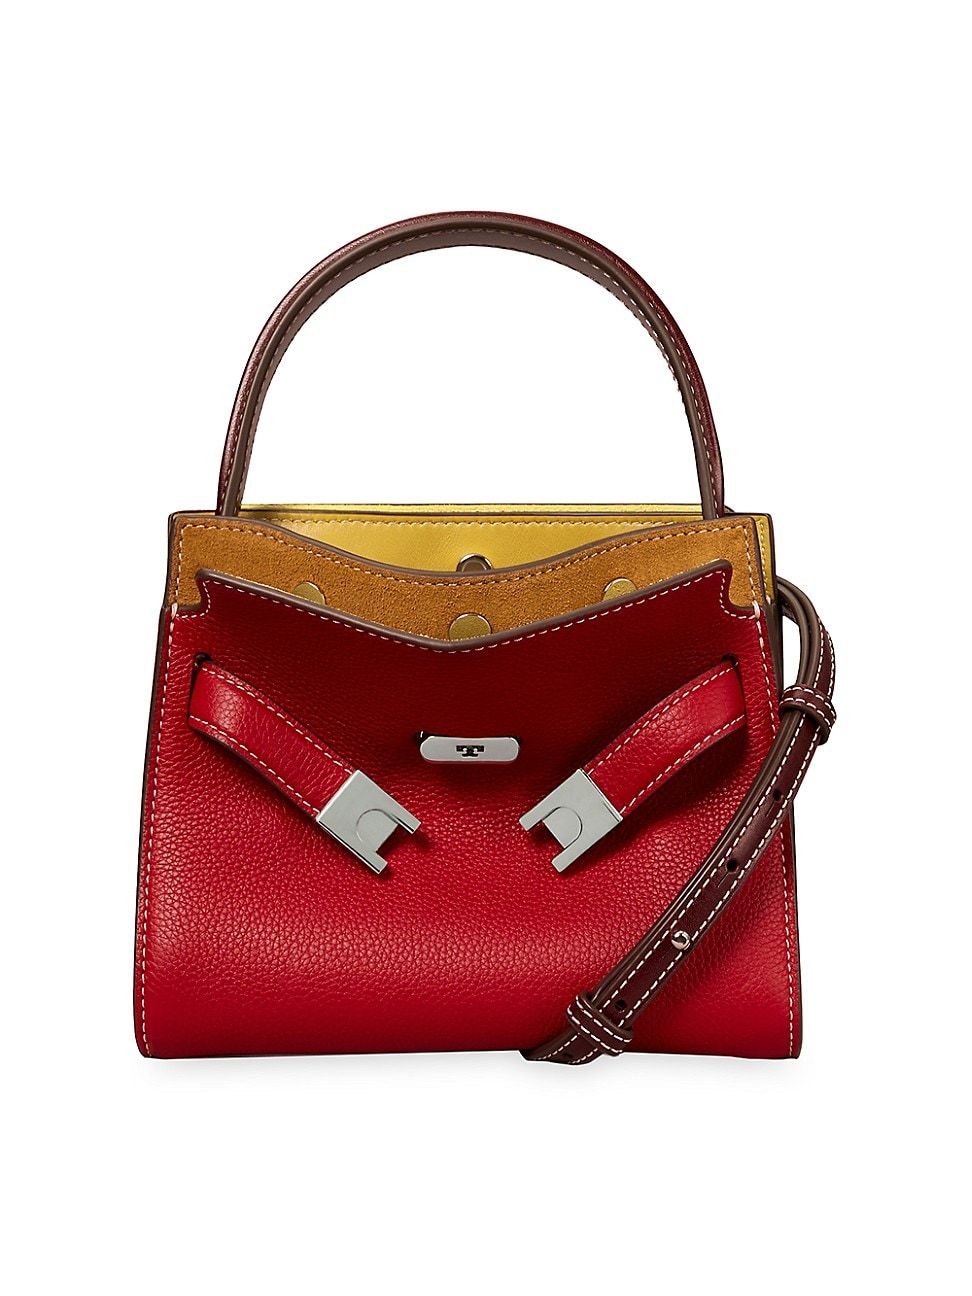 Women's Petite Lee Radziwill Pebbled Double Bag - Tory Red